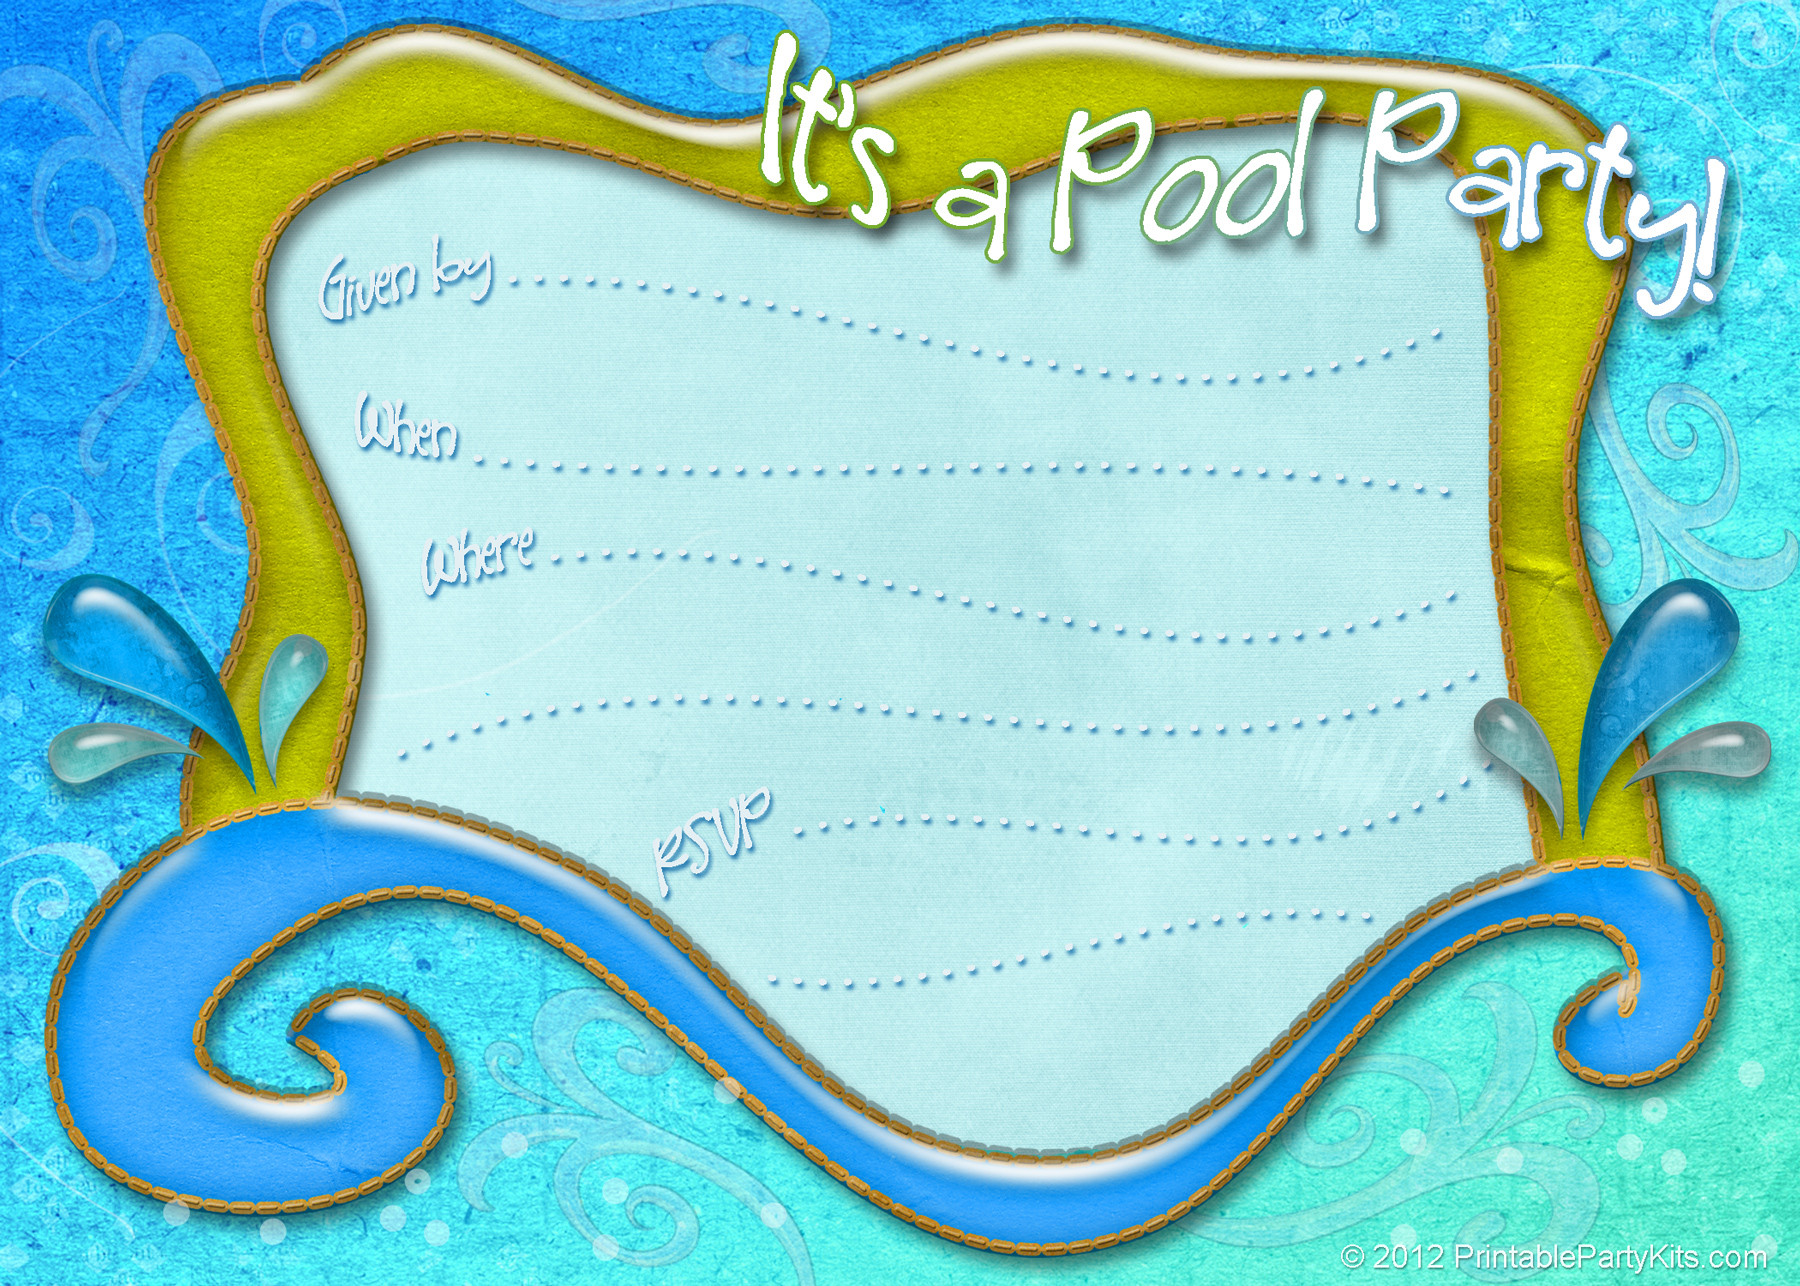 Pool Party Invitations Ideas
 45 Pool Party Invitations